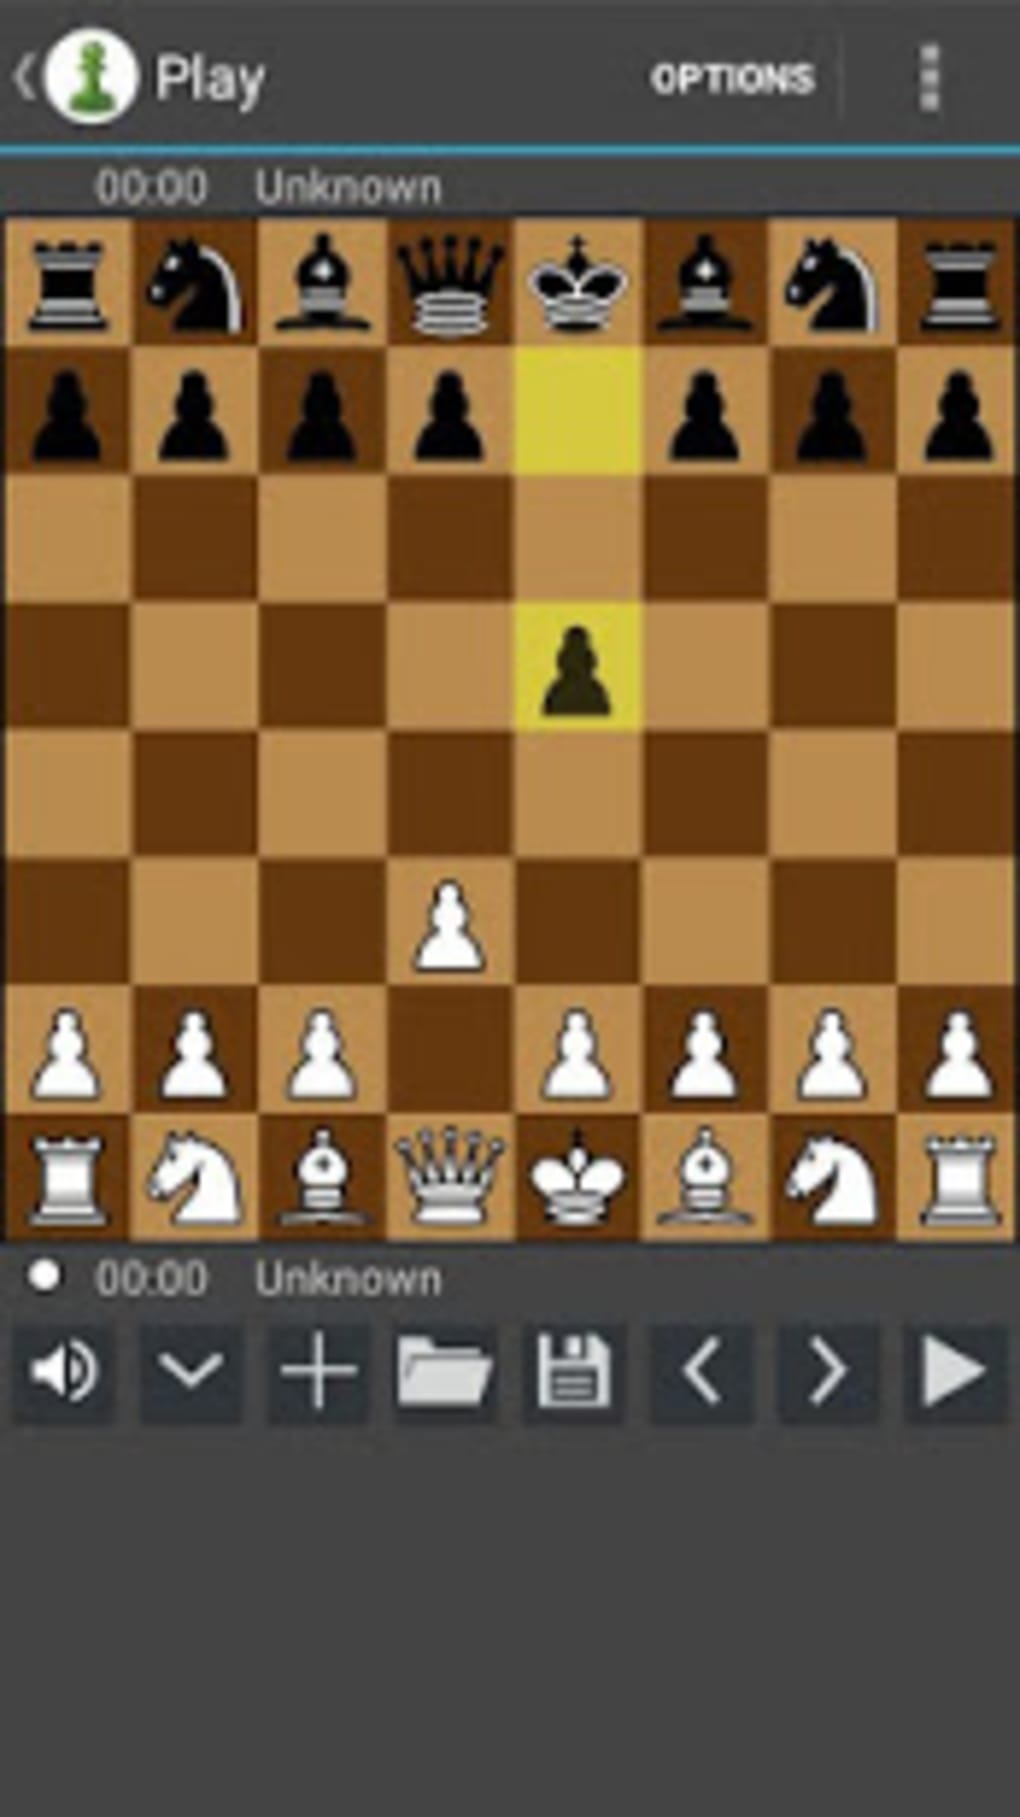 lichess - free online and offline chess game for Android and iOS